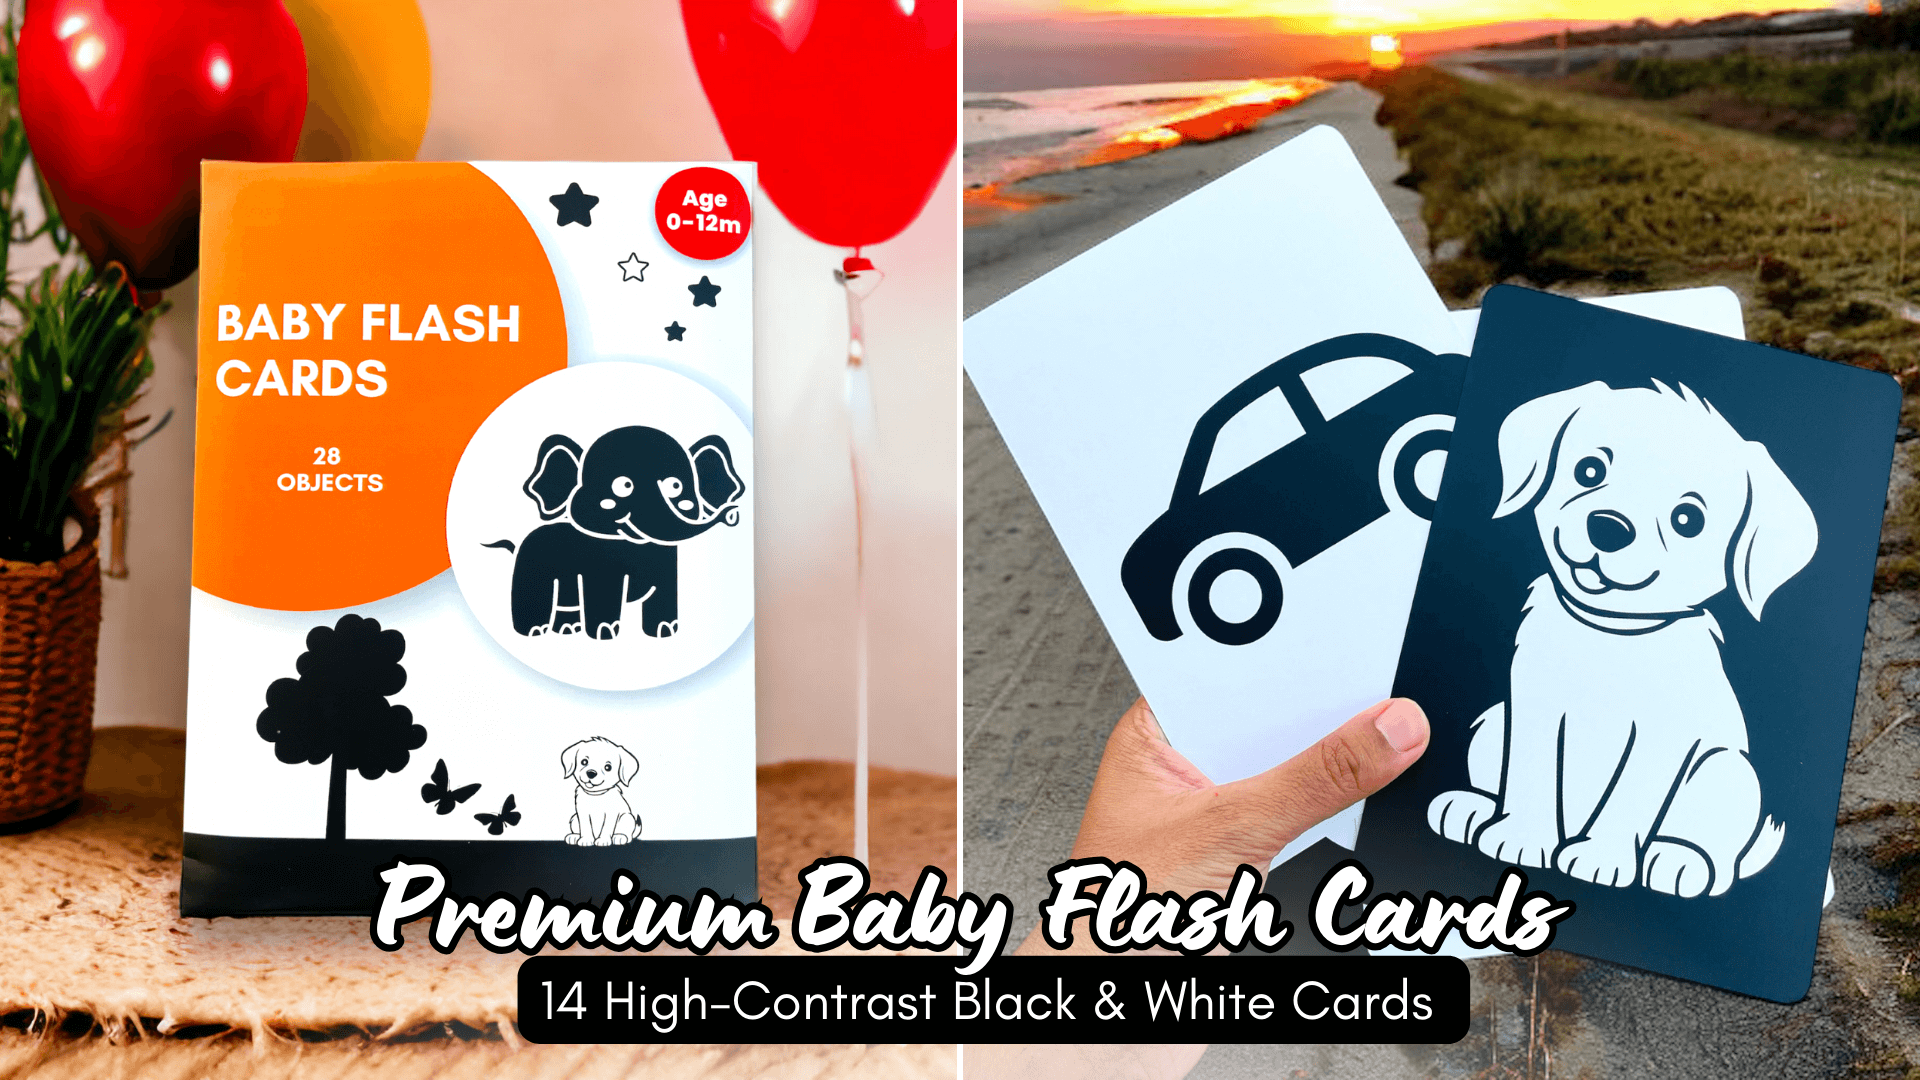 Load video: Baby flash cards video